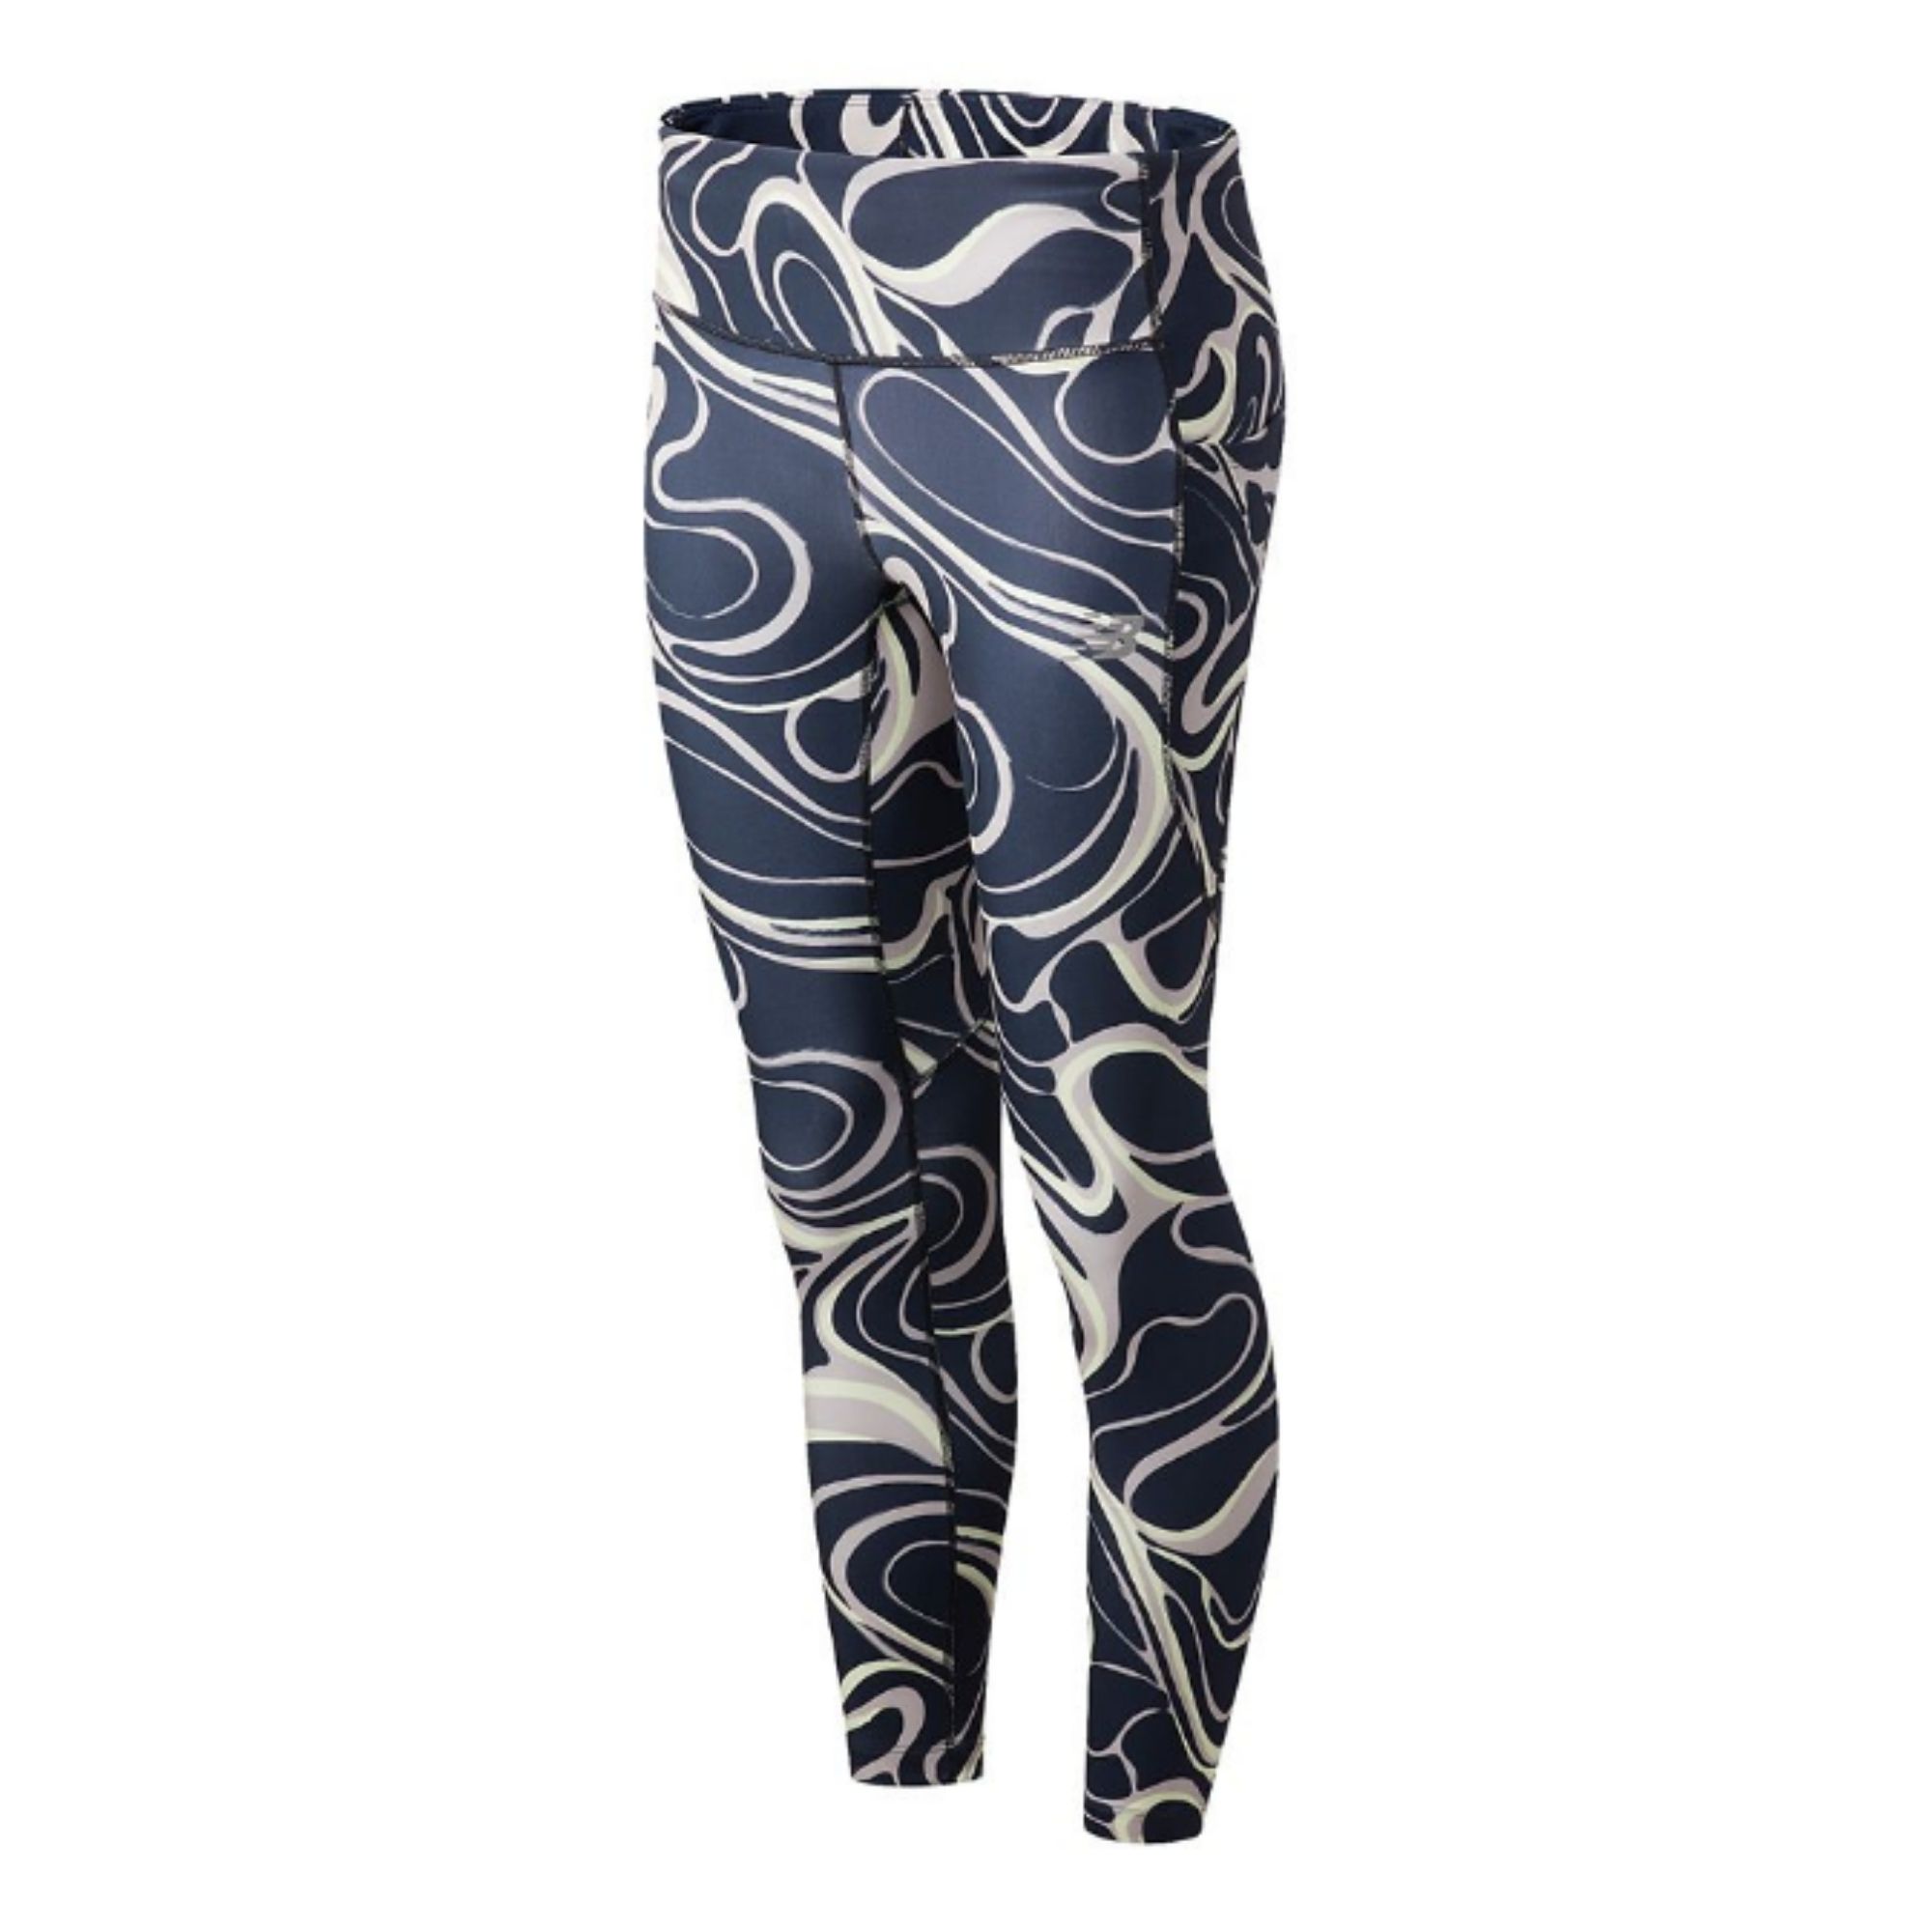 Women's Sports Trousers and Tights - New Balance